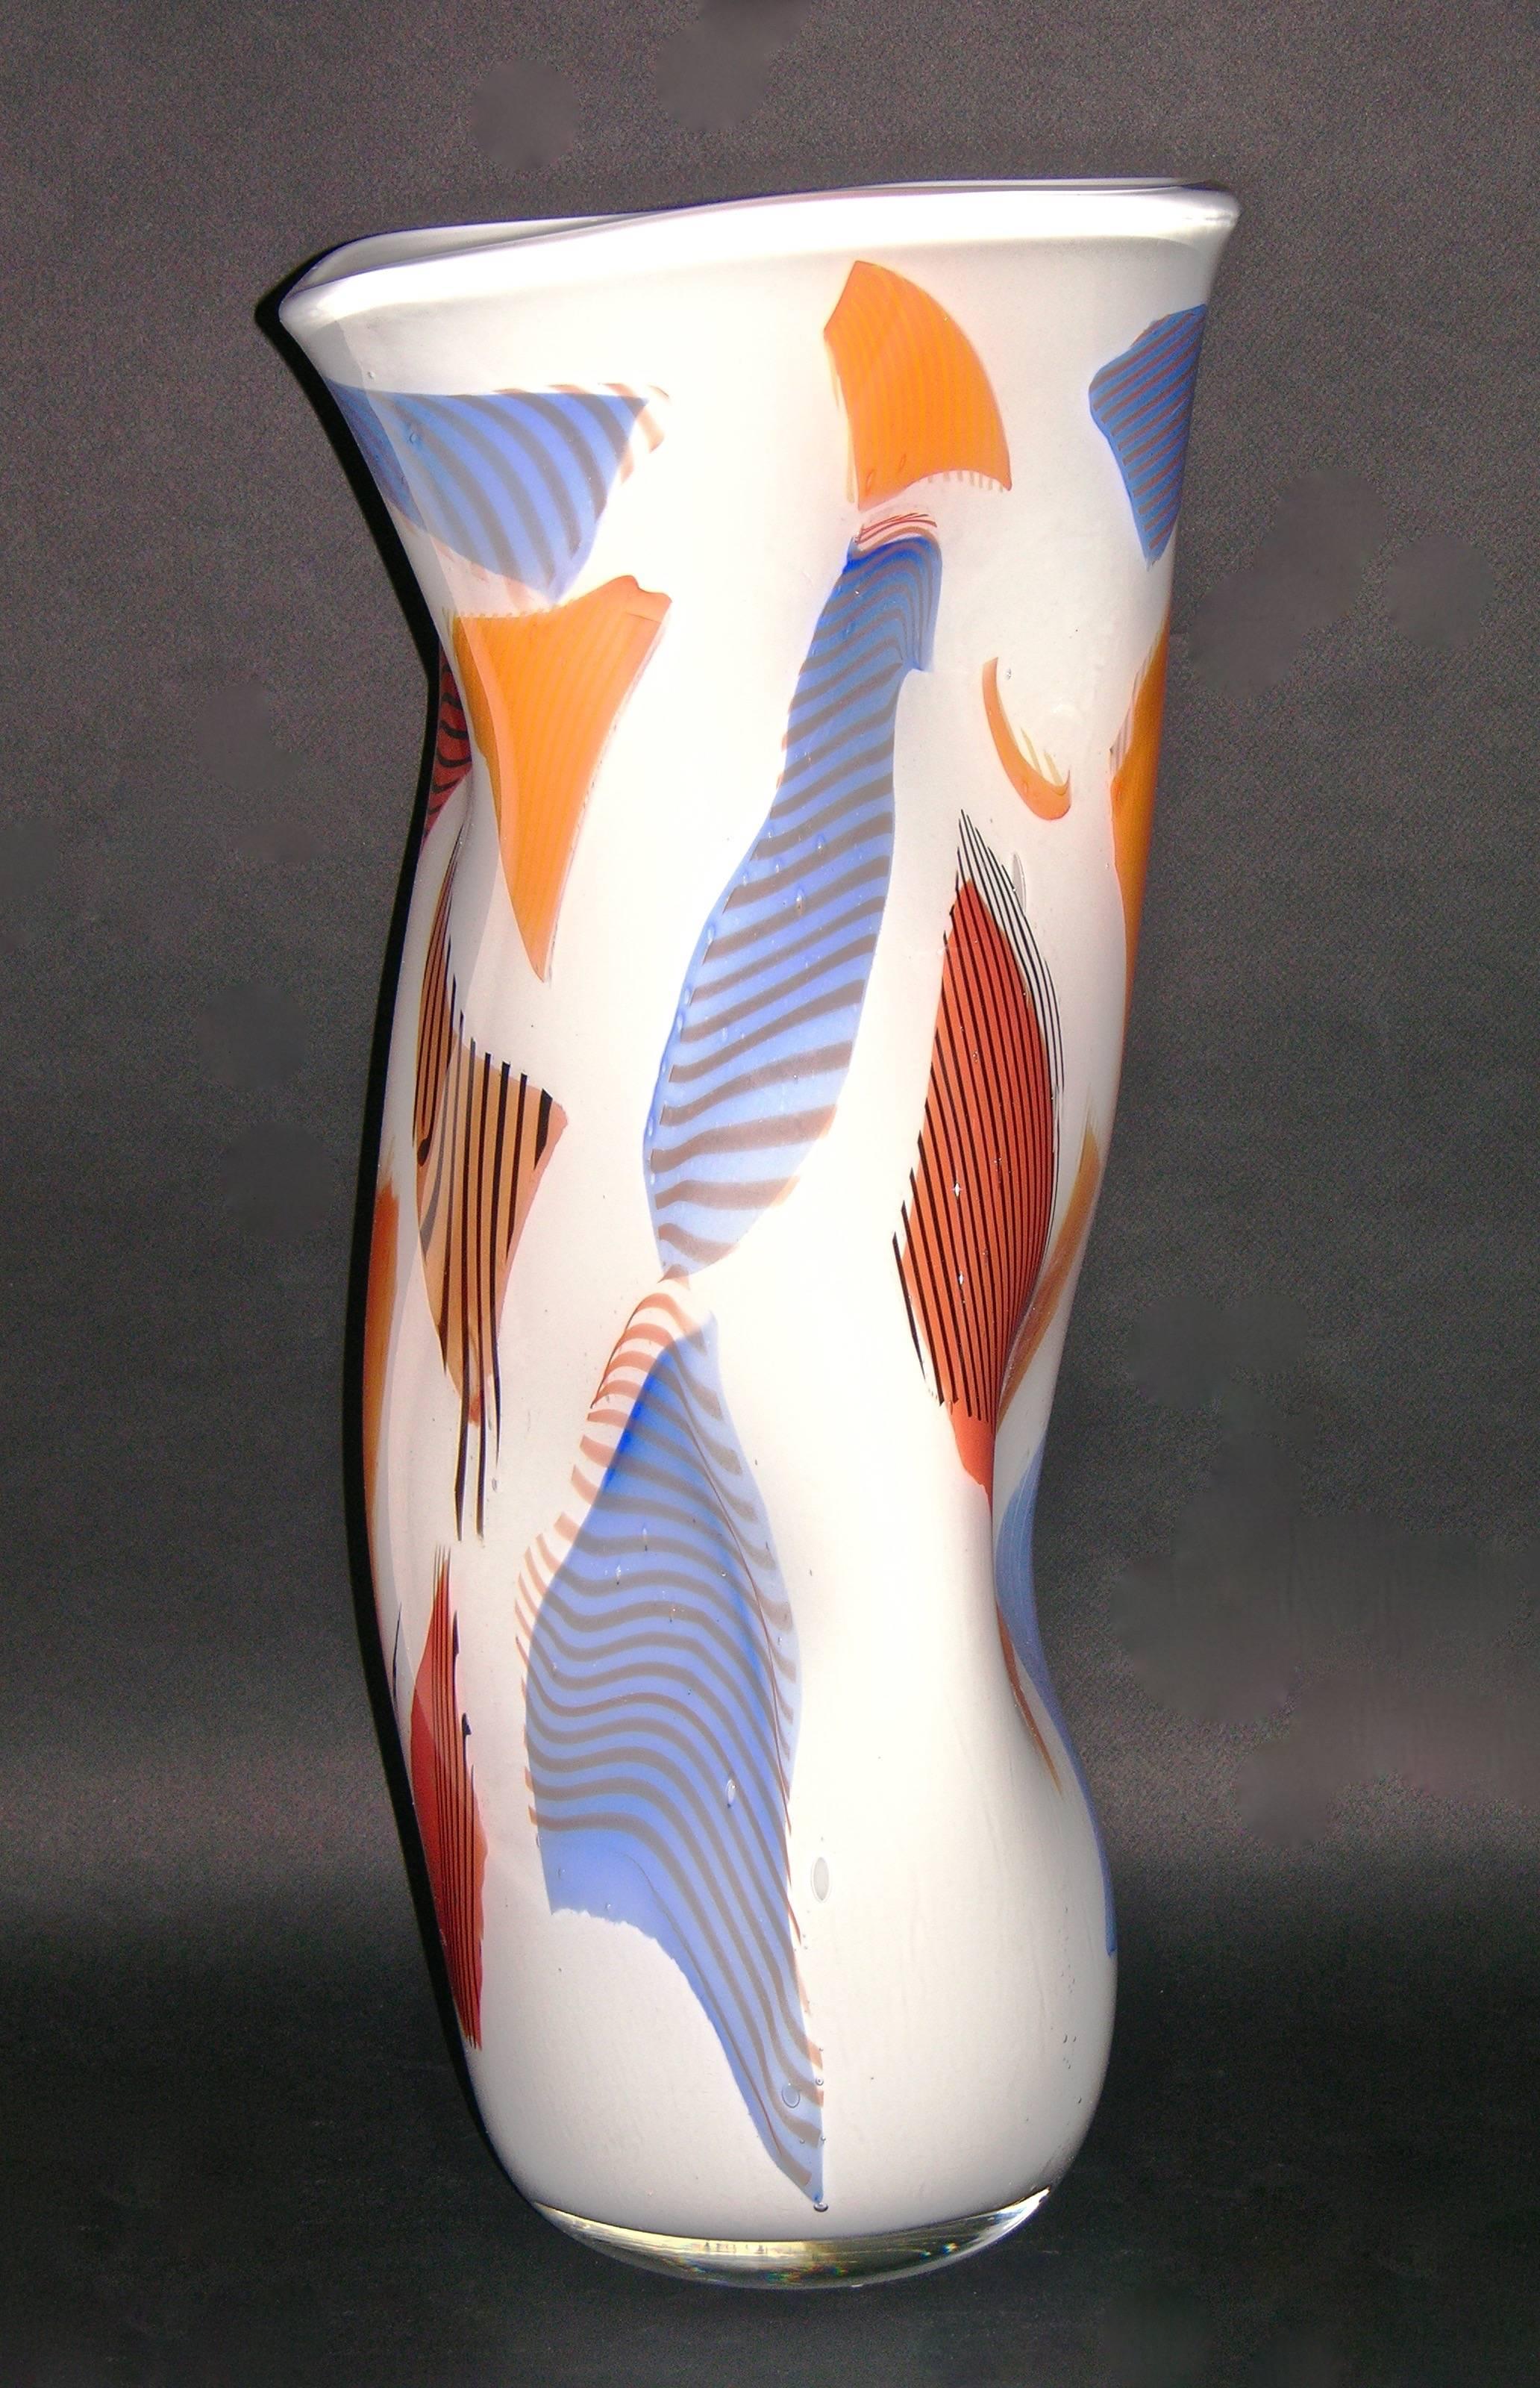 Italian vases, contemporary work of art signed by Davide Dona' in blown Murano Art glass. These striking ivory white vases are beautifully worked with Murrine in orange, blue and red tones, highlighted with black accents. The shape is unusual in its